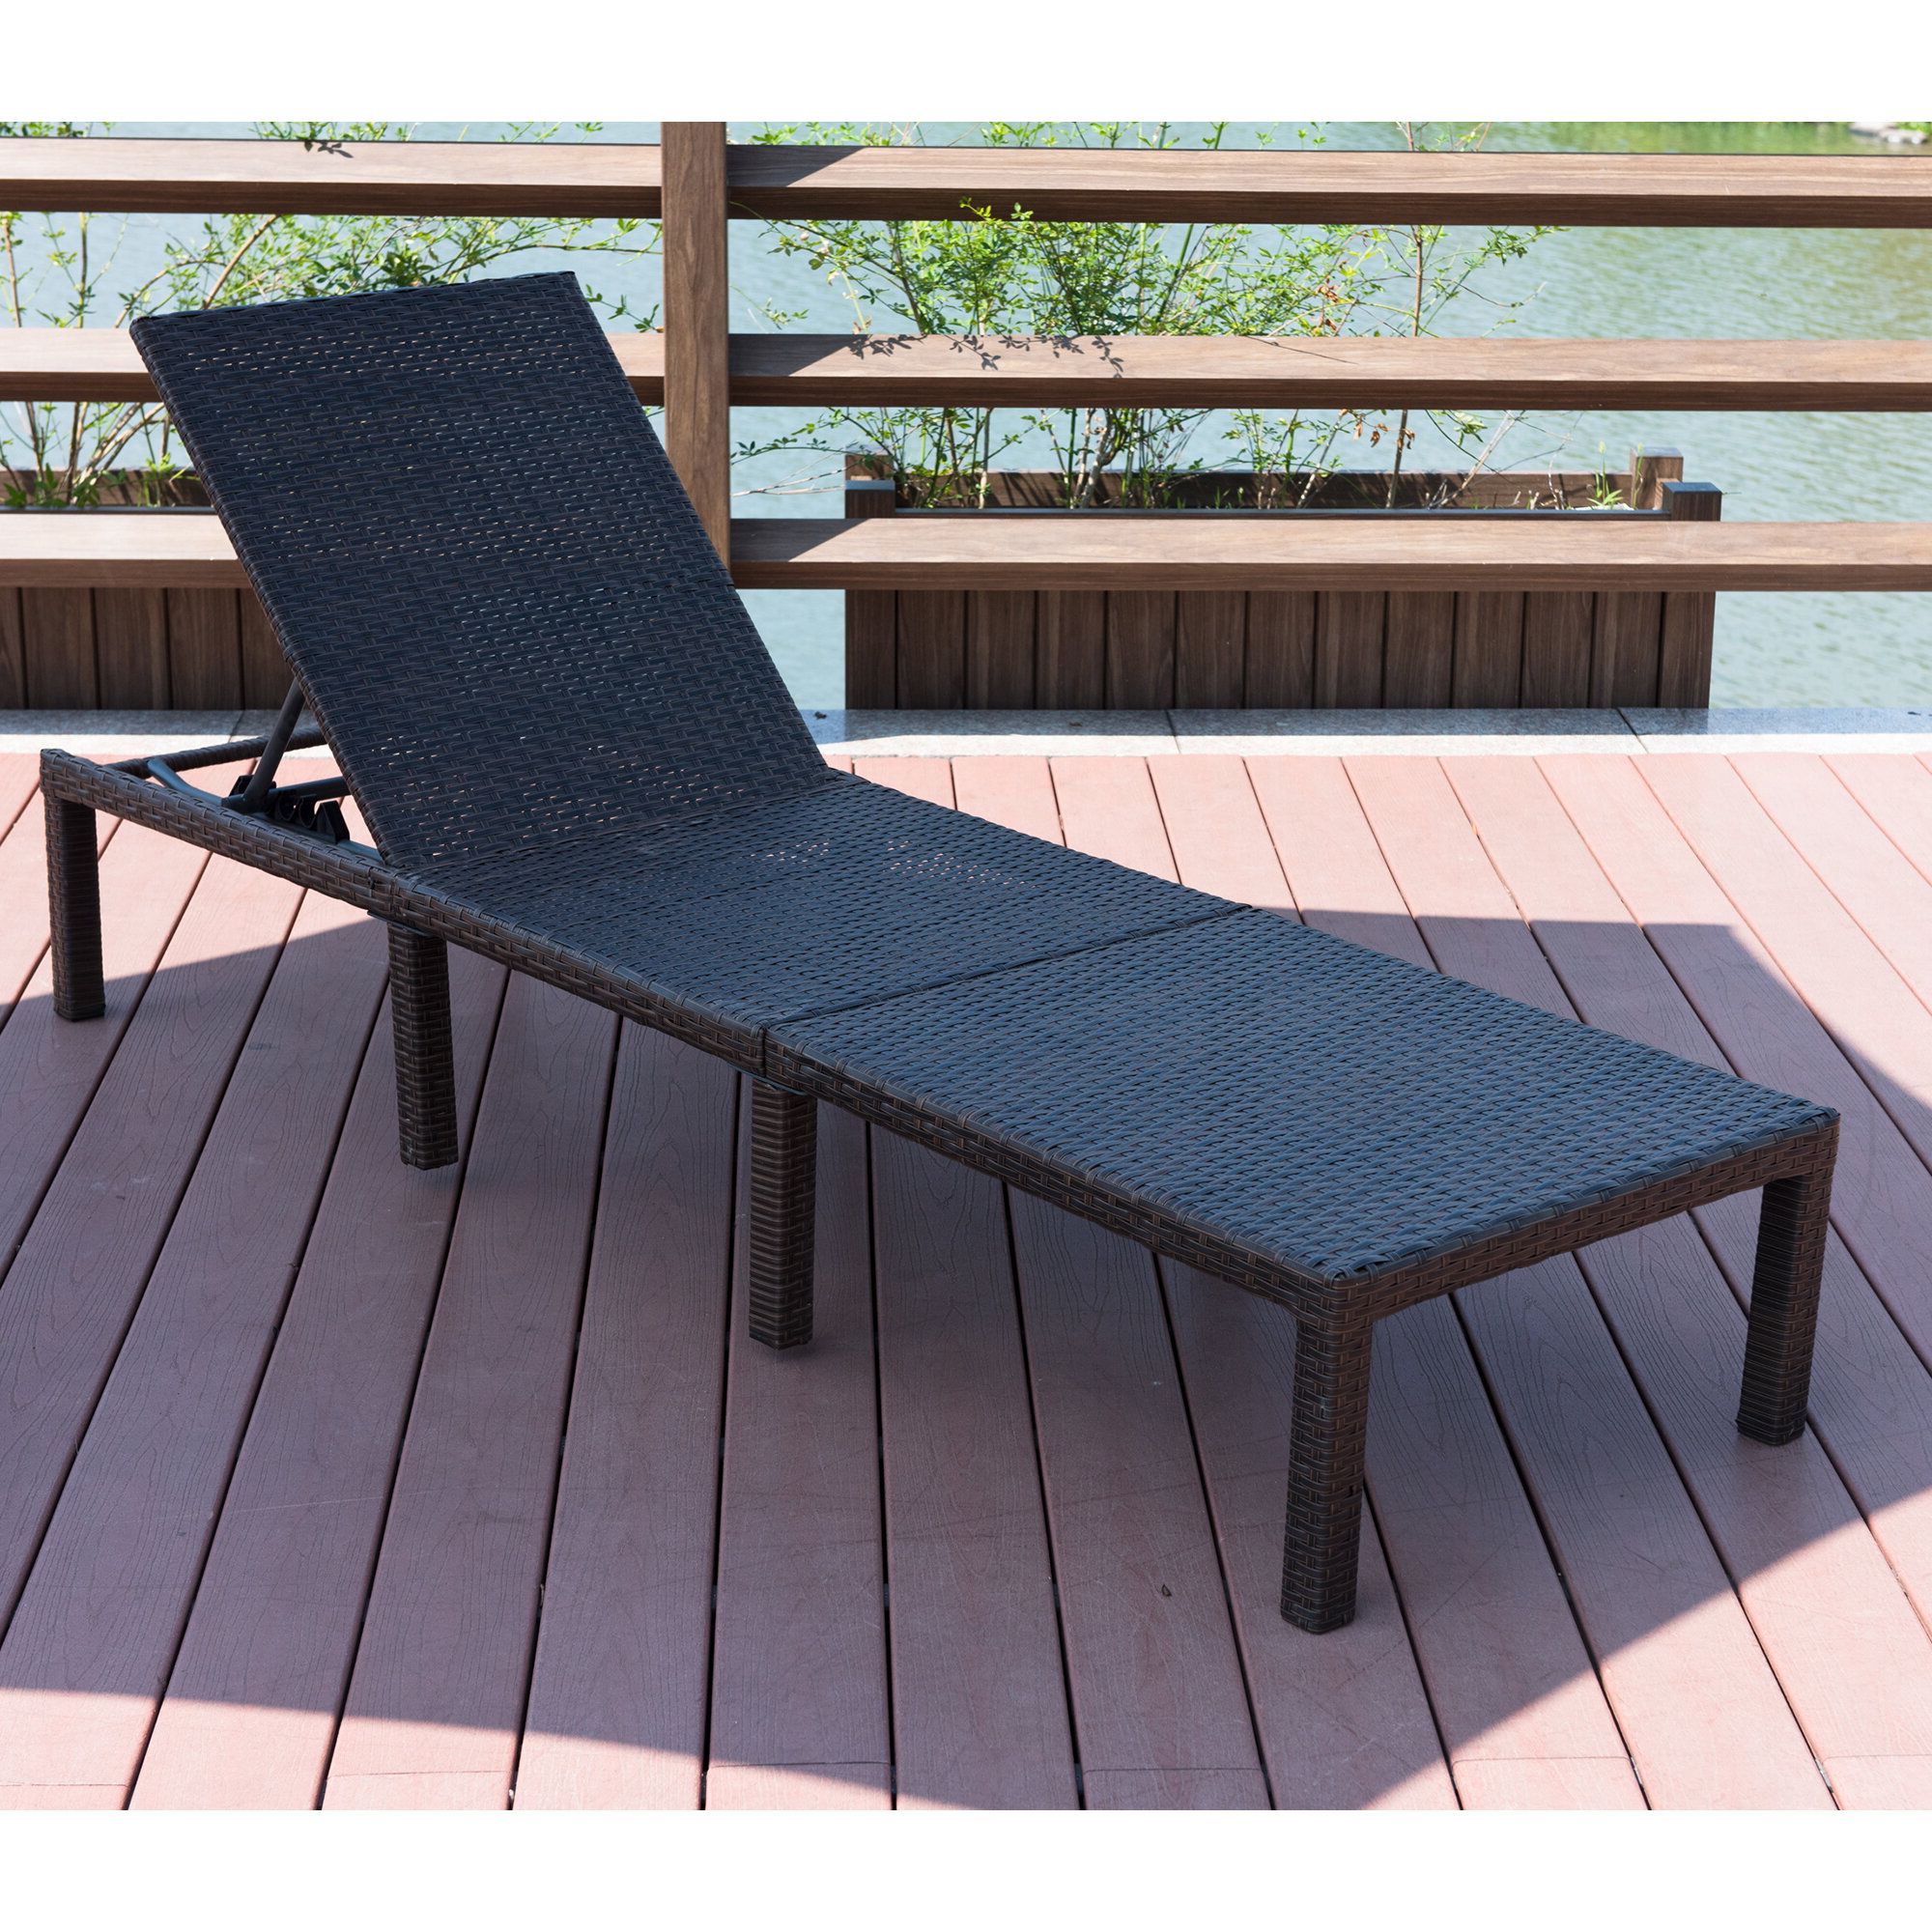 Wicker Adjustable Chaise Loungers With Cushion Throughout Most Up To Date Cavin Adjustable Wicker Chaise Lounge With Cushion (View 23 of 25)